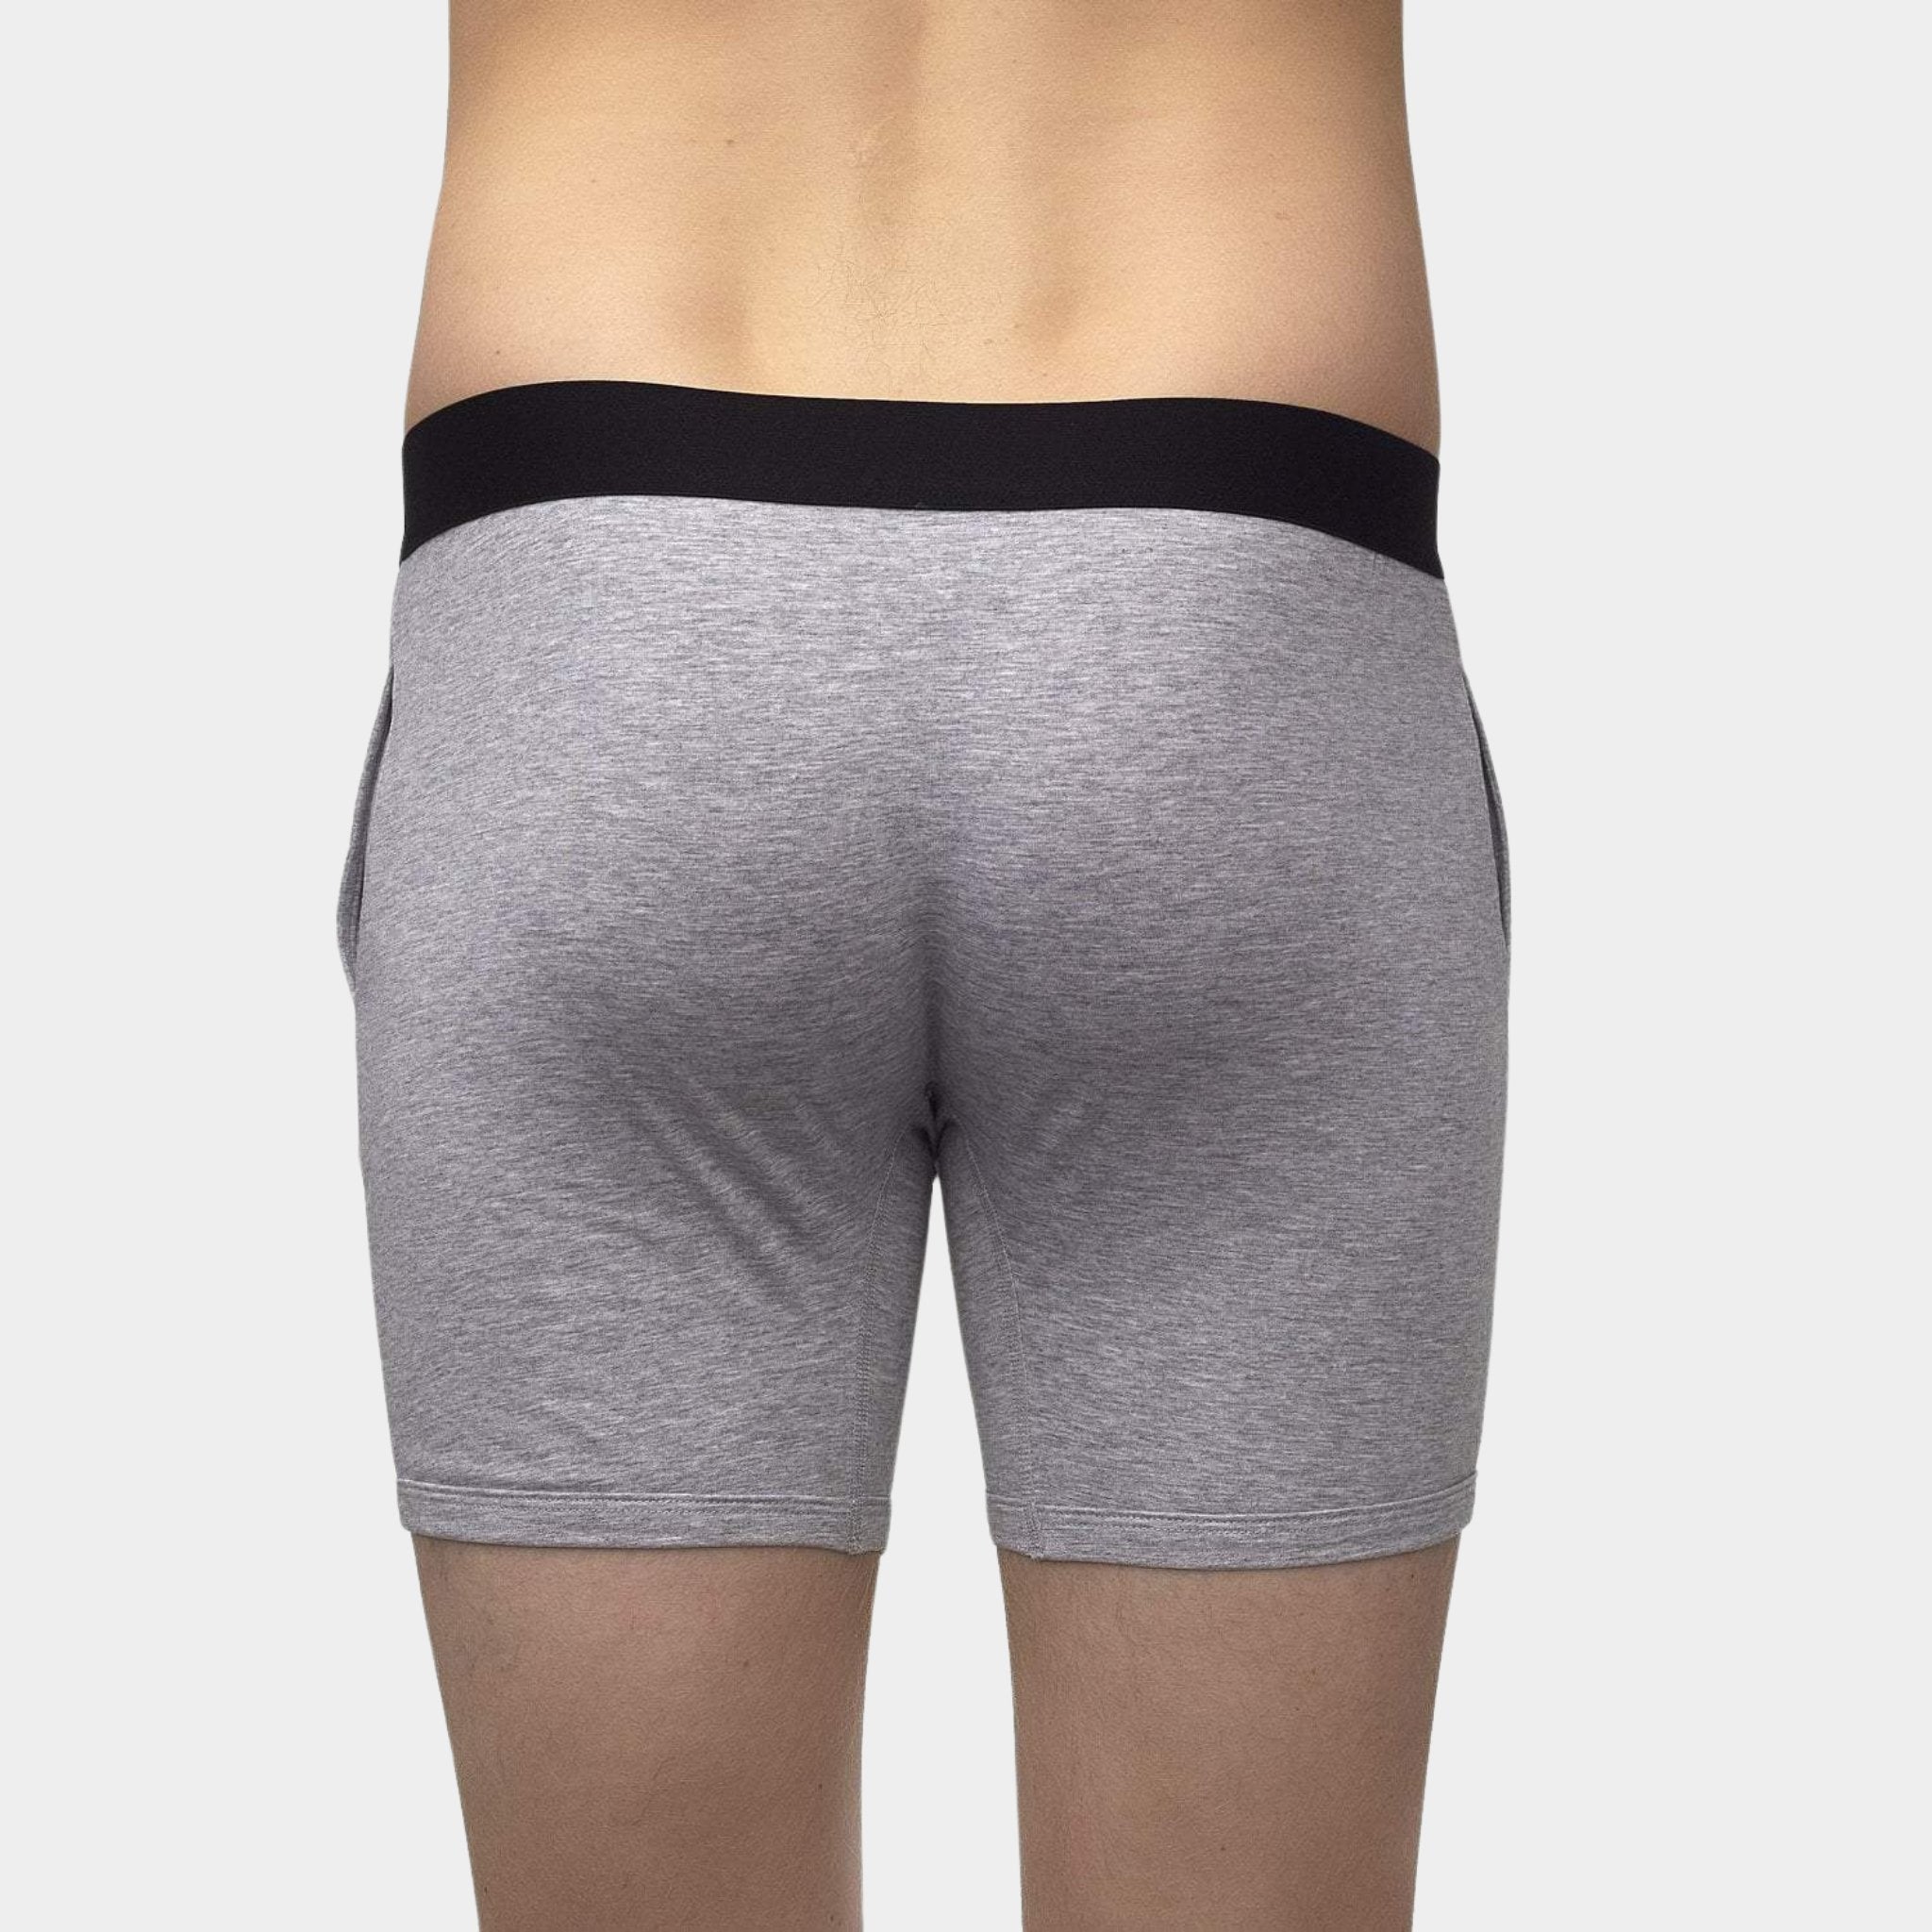 Gender-Neutral Boxers With Pockets - Grey